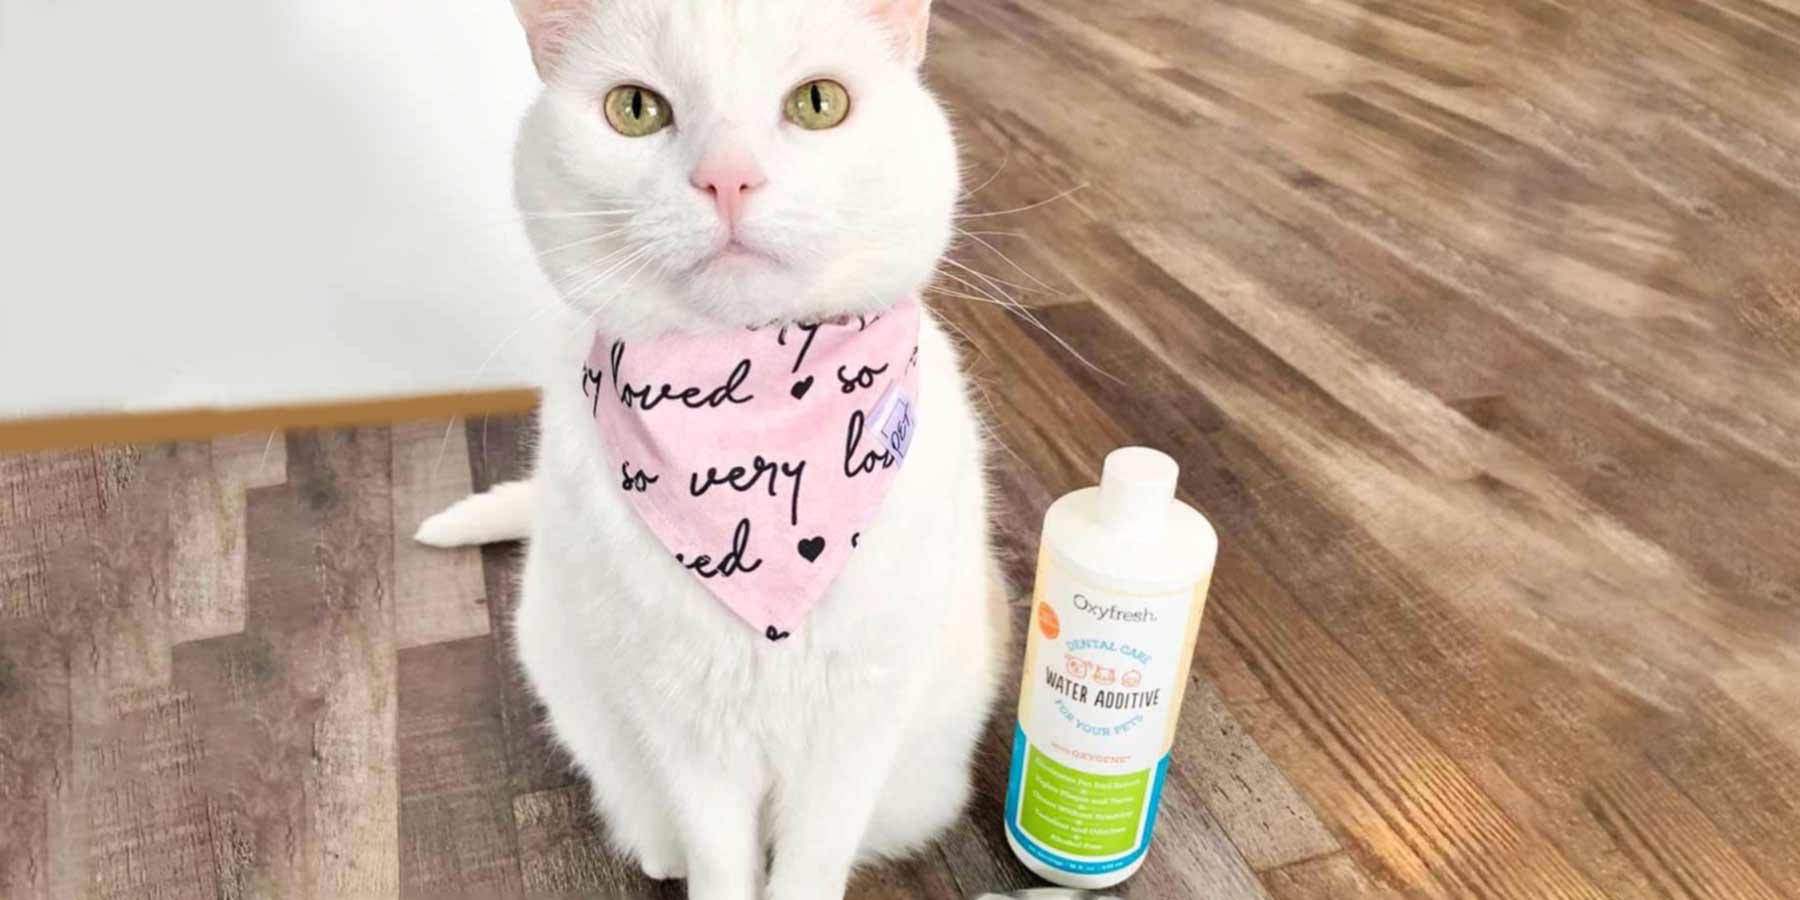 Social-Media-Post-From-Instagram-User-artemiss_jane--cute-white-cat-with-green-eyes-and-pink-bandana-sitting-patiently-on-the-floor-next-to-water-bowl-and-oxyfresh-cat-dental-water-additive-for-cat-teeth-and-bad-breath